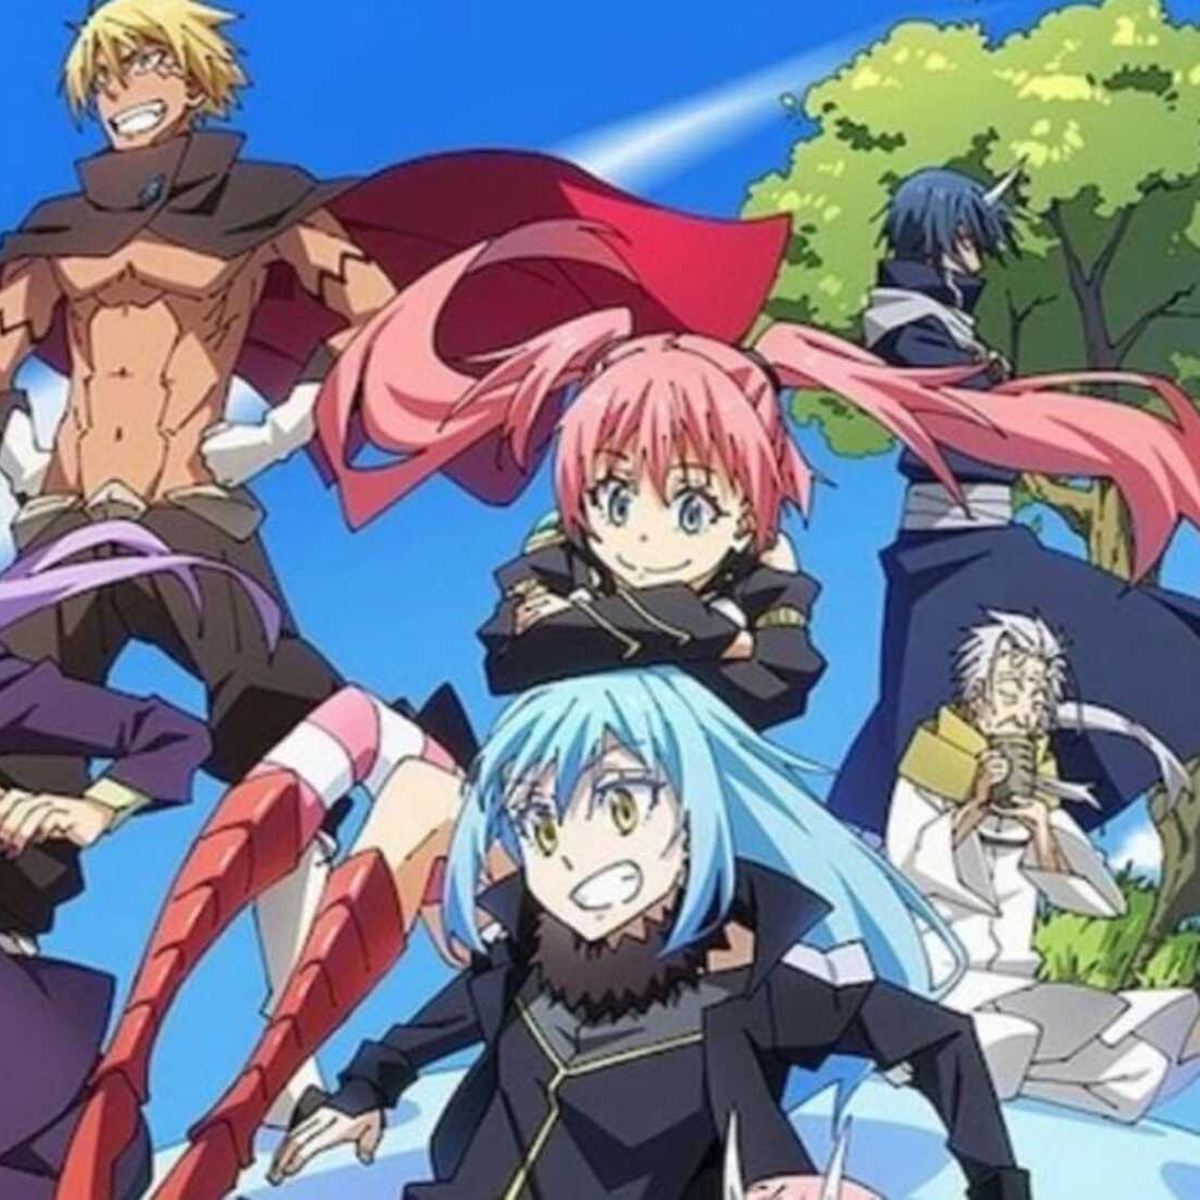 TV Time - That Time I Got Reincarnated as a Slime (TVShow Time)